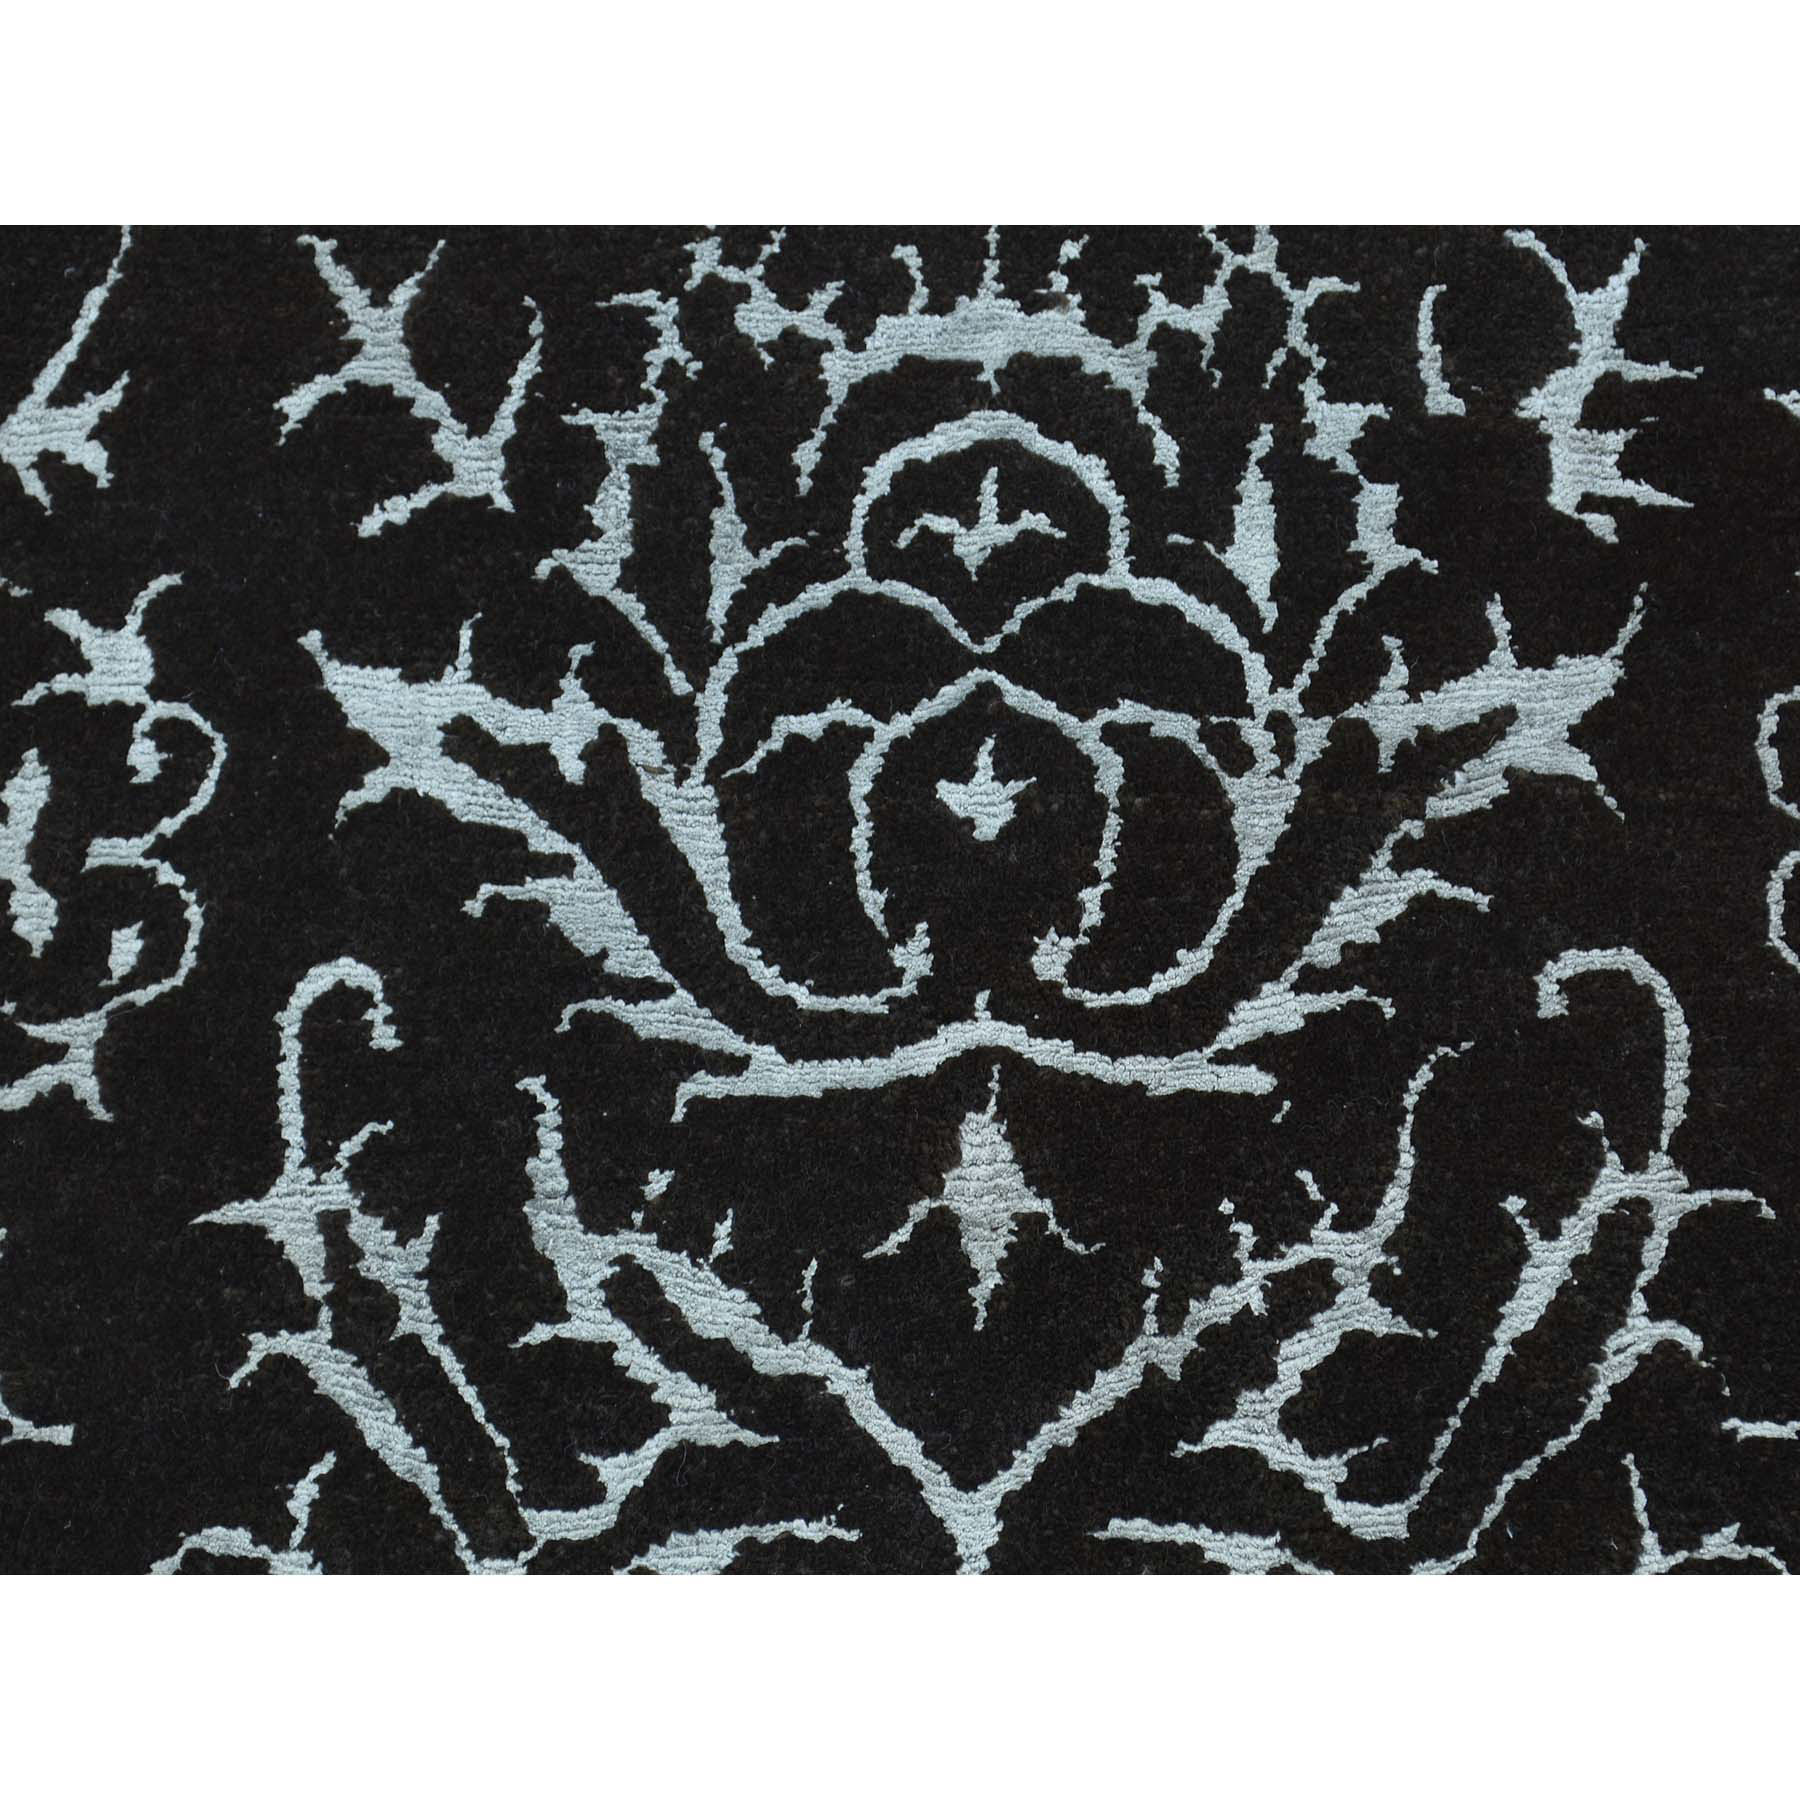 2-x2-10  Modern Wool and Silk Damask Design Hand-Knotted Rug 